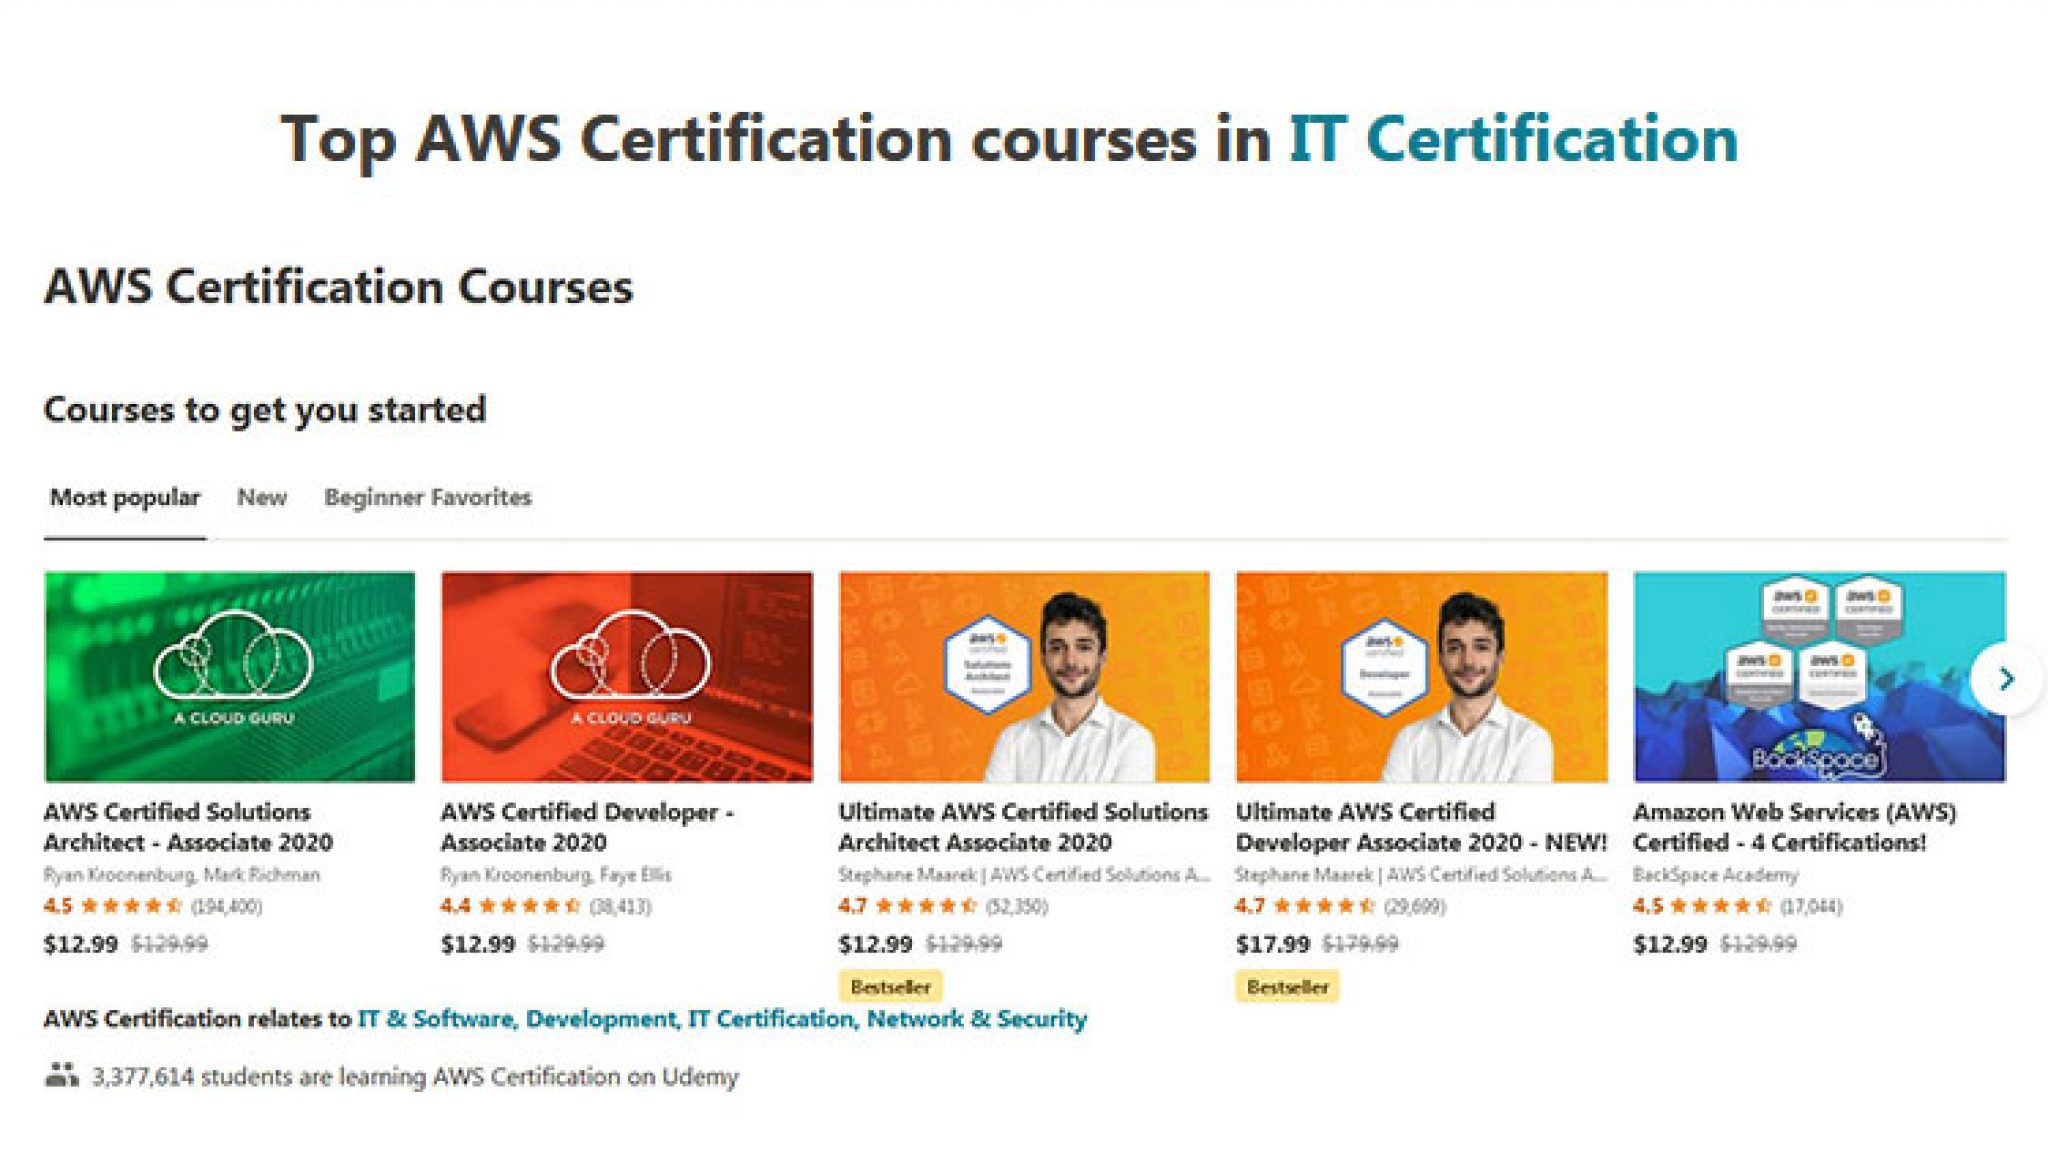 udemy aws certification